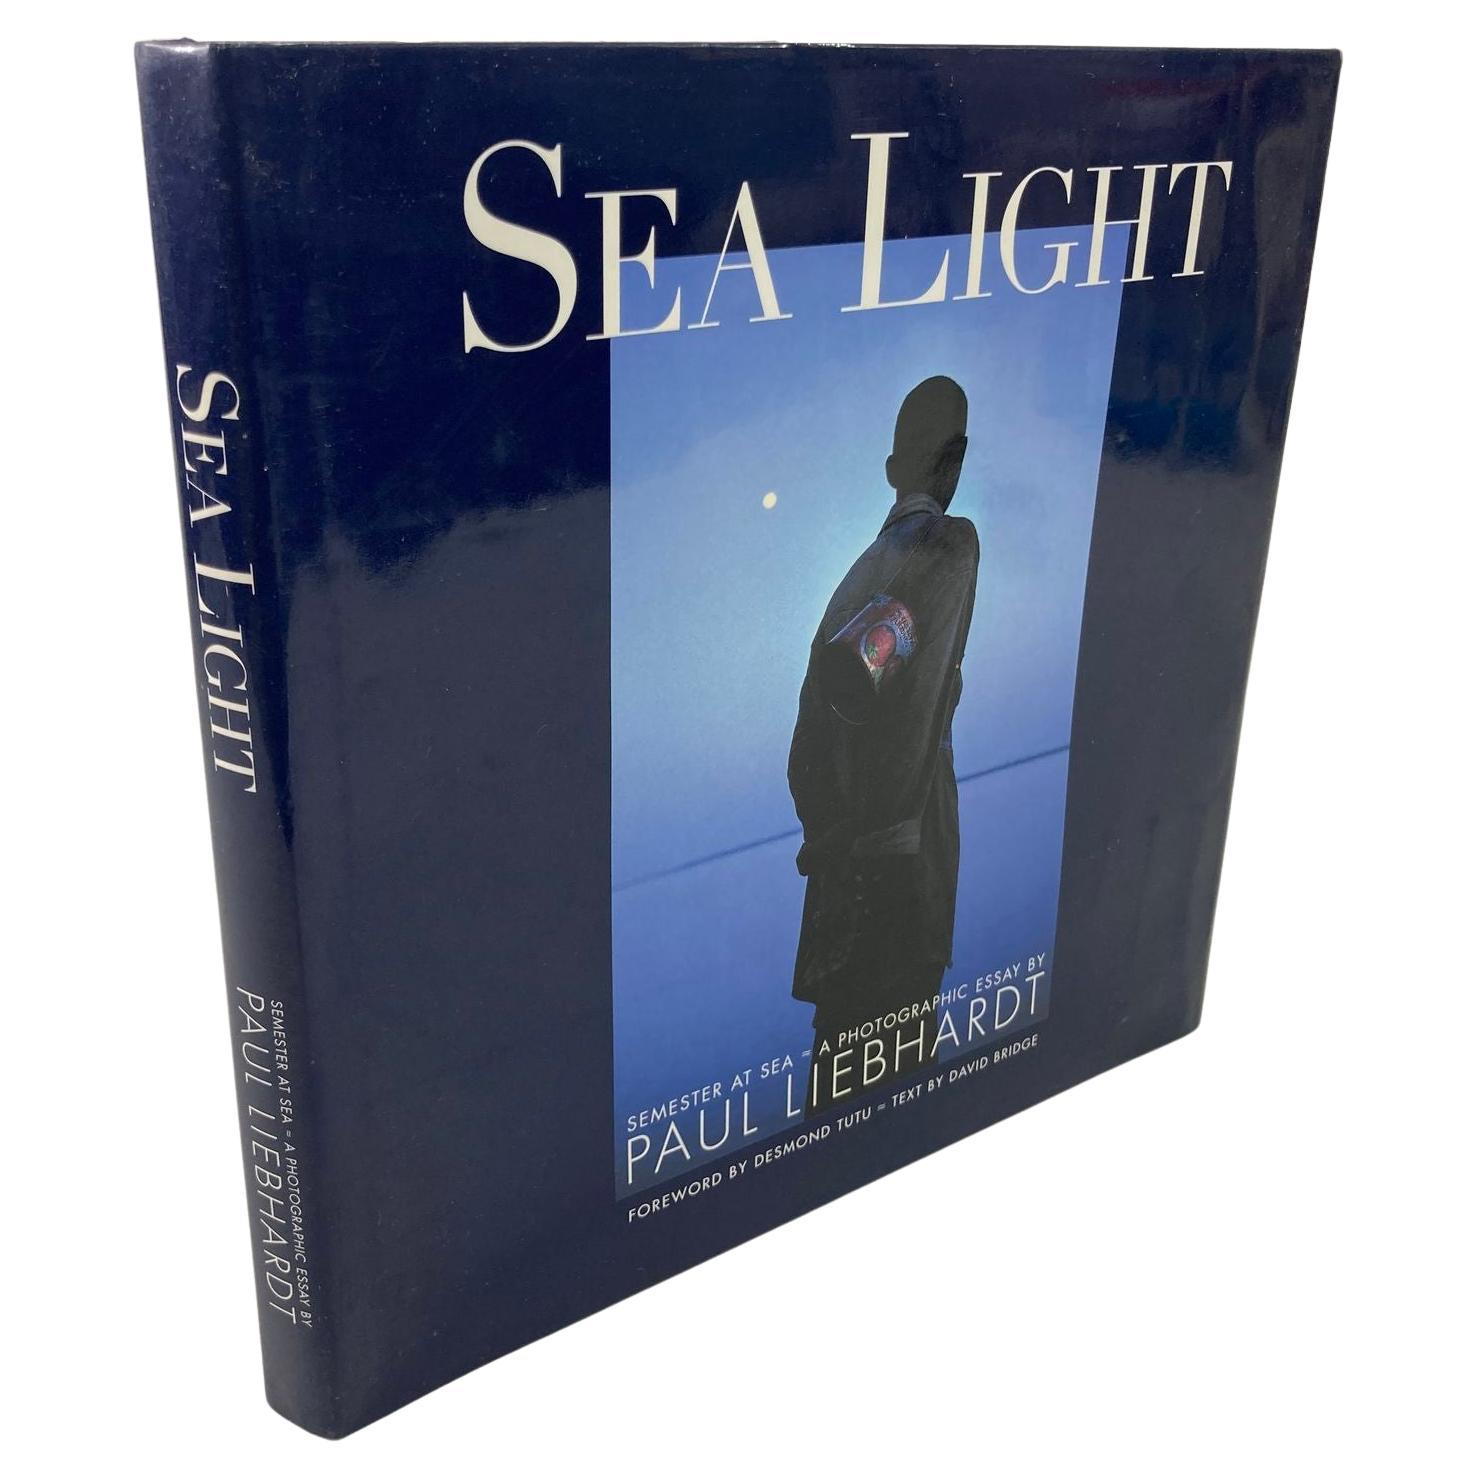 Sea Light by Paul Liebhardt Hardcover Photography Book, 1997